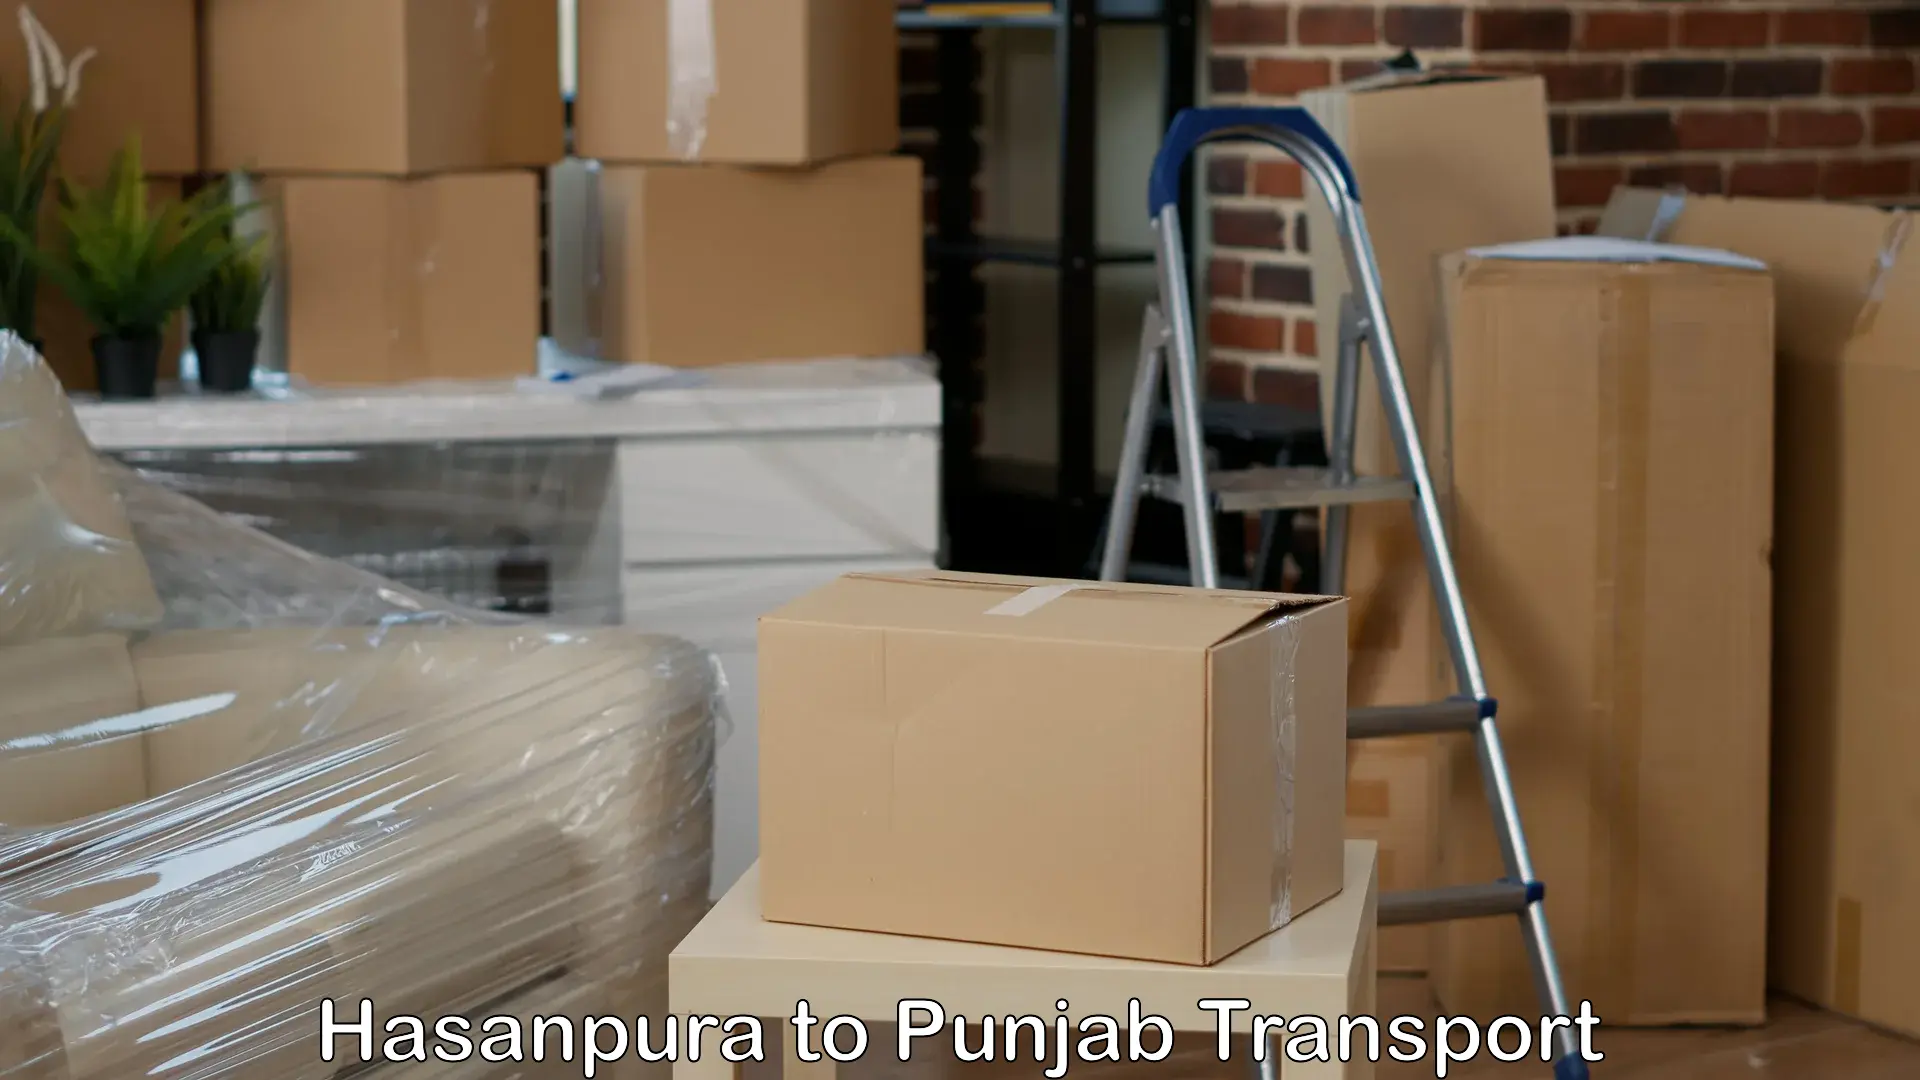 Transport shared services in Hasanpura to Pathankot